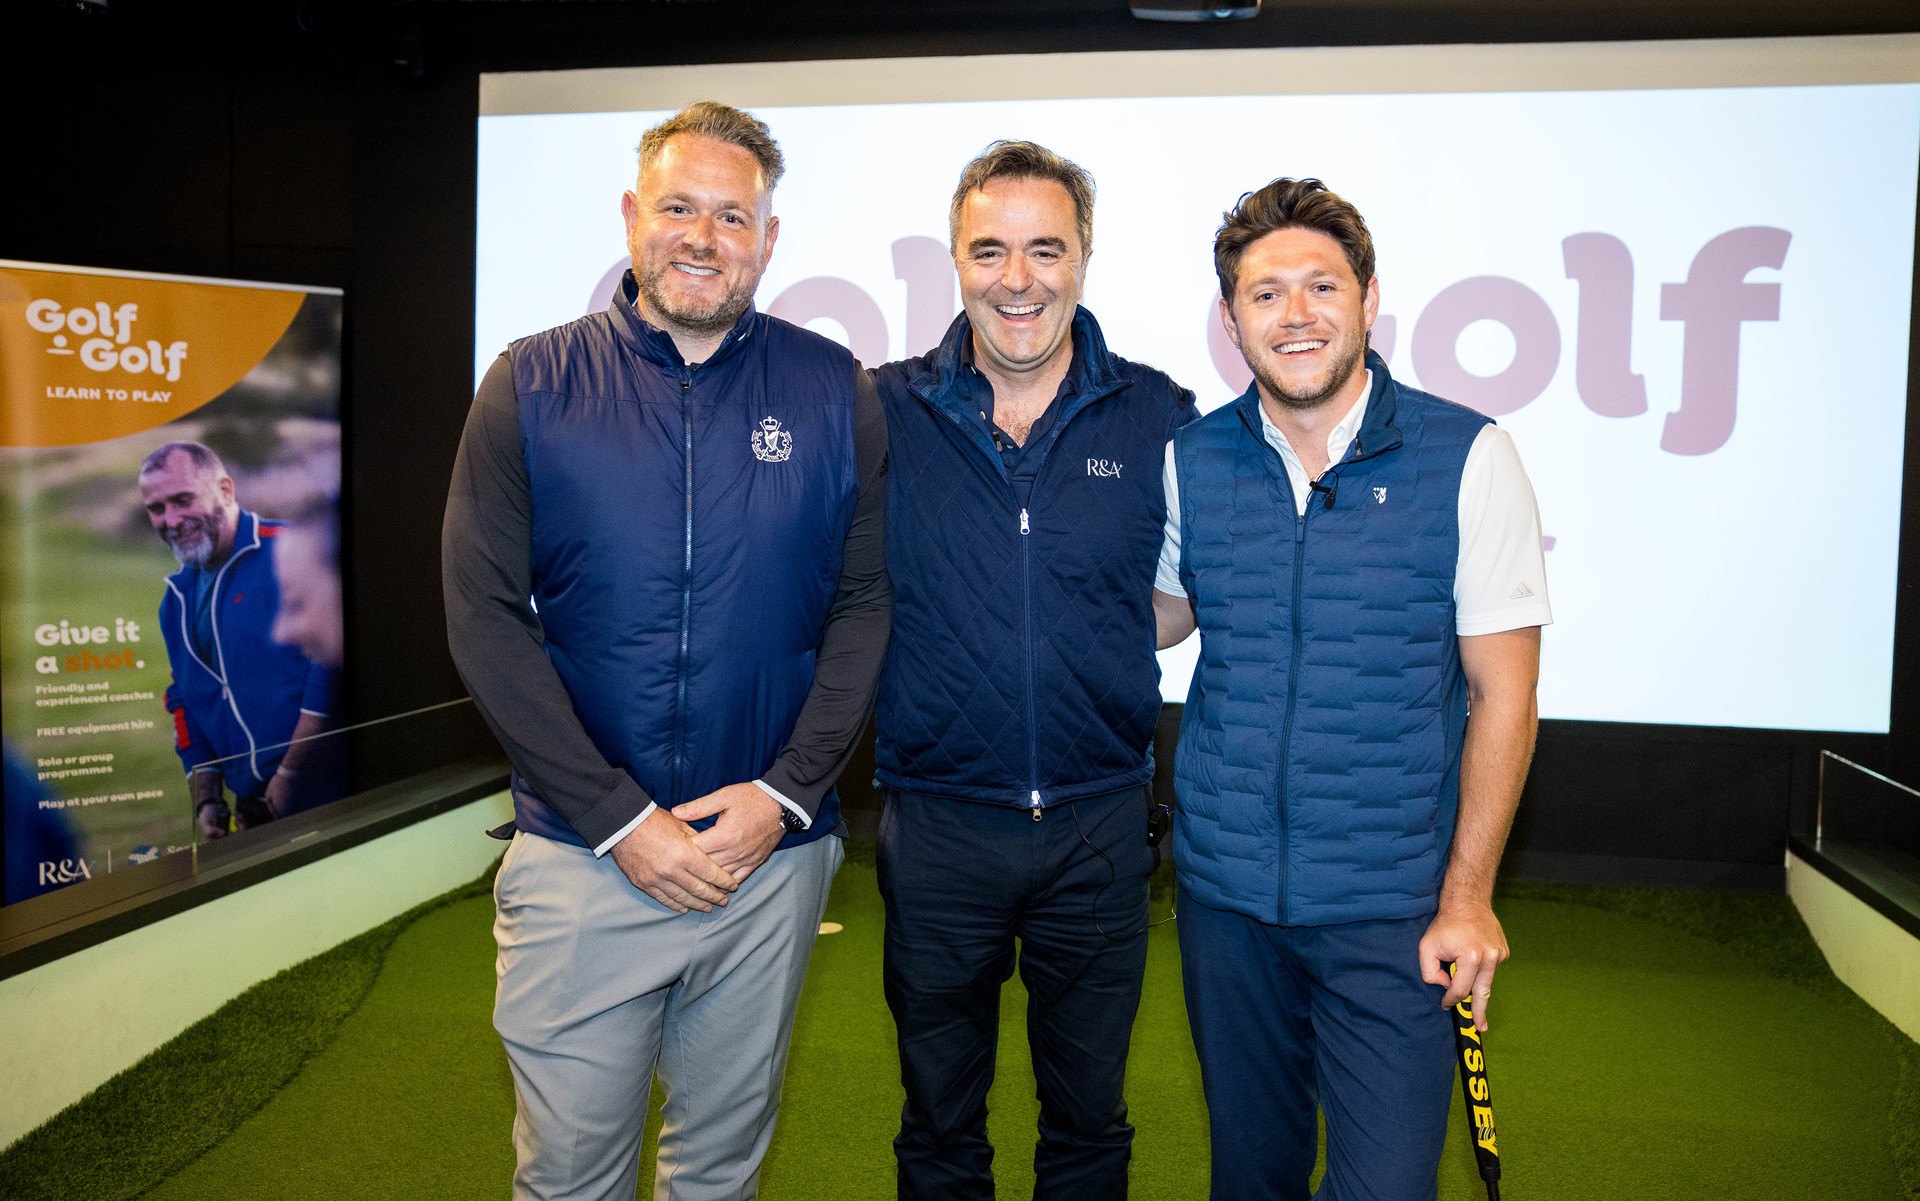 Mark McDonnell (co-founder Modest! Golf Management), Phil Anderton (chief development officer, the R&A) and Niall Horan (R&A ambassador and co-founder, Modest! Golf Management) pose during the R&A Golf.Golf launch at St Andrews. (Ross Parker: Getty)